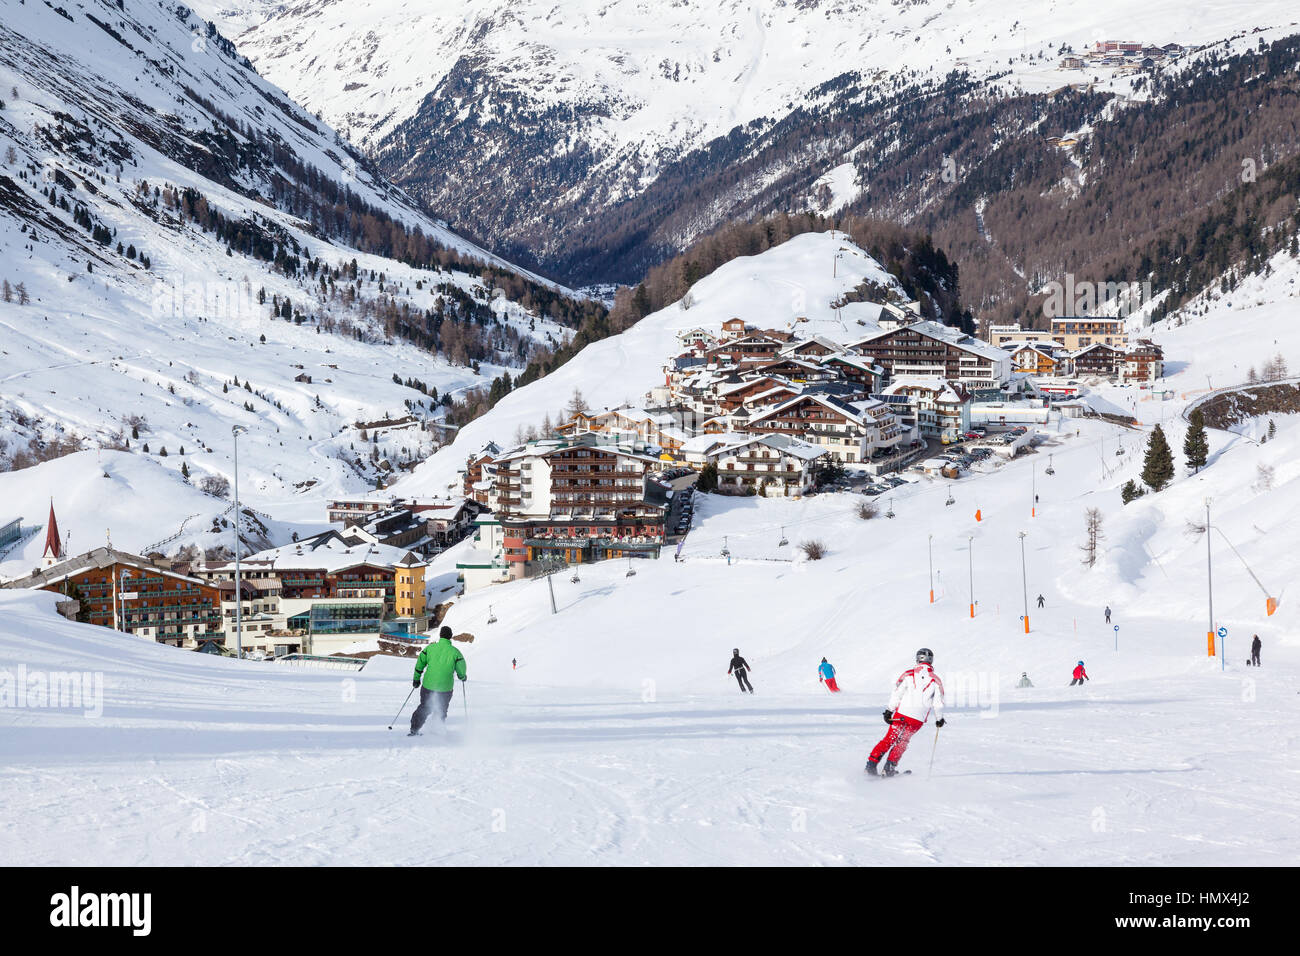 OBERGURGL, AUSTRIA - MARCH, 16 : People skiing down a piste at Obergurgl, Austria on 16th March 2013. Situated in the Otztal Alps at an elevation of 1 Stock Photo